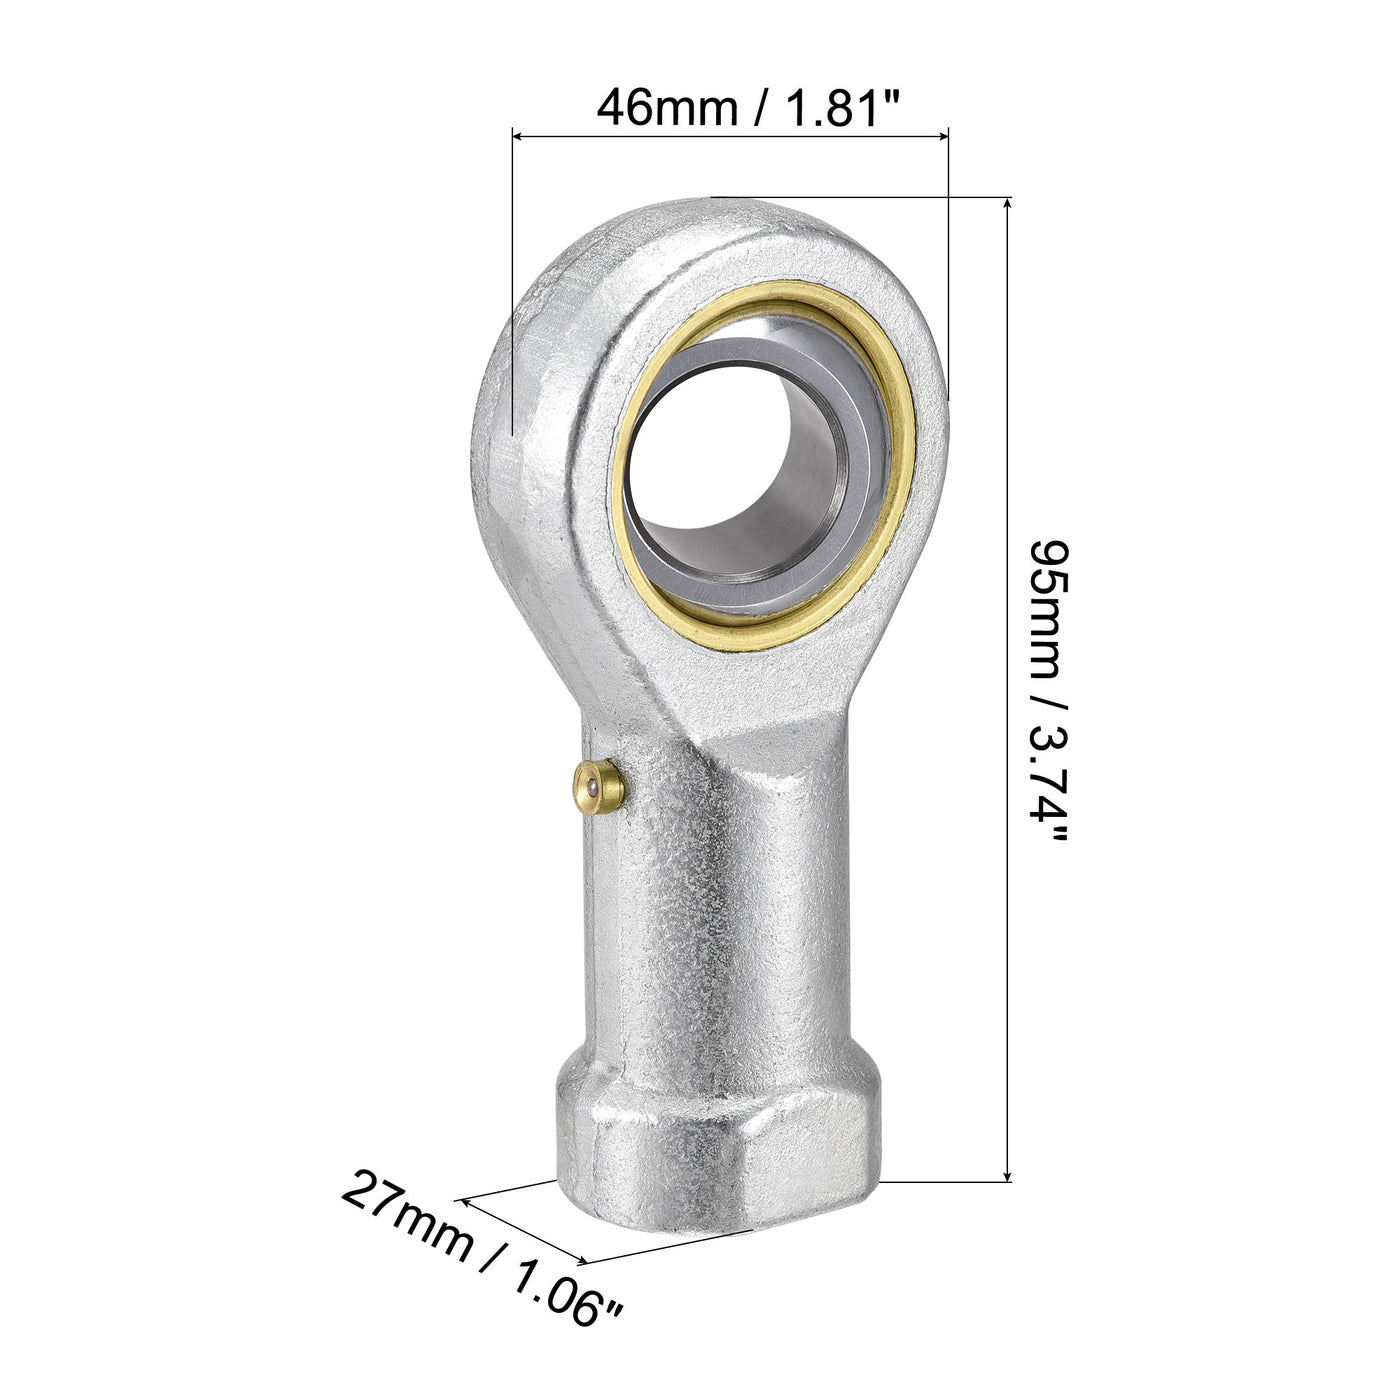 uxcell Uxcell PHSB8 Rod End Bearing 1/2-inch Bore 1/2-20 Female Thread Right Hand